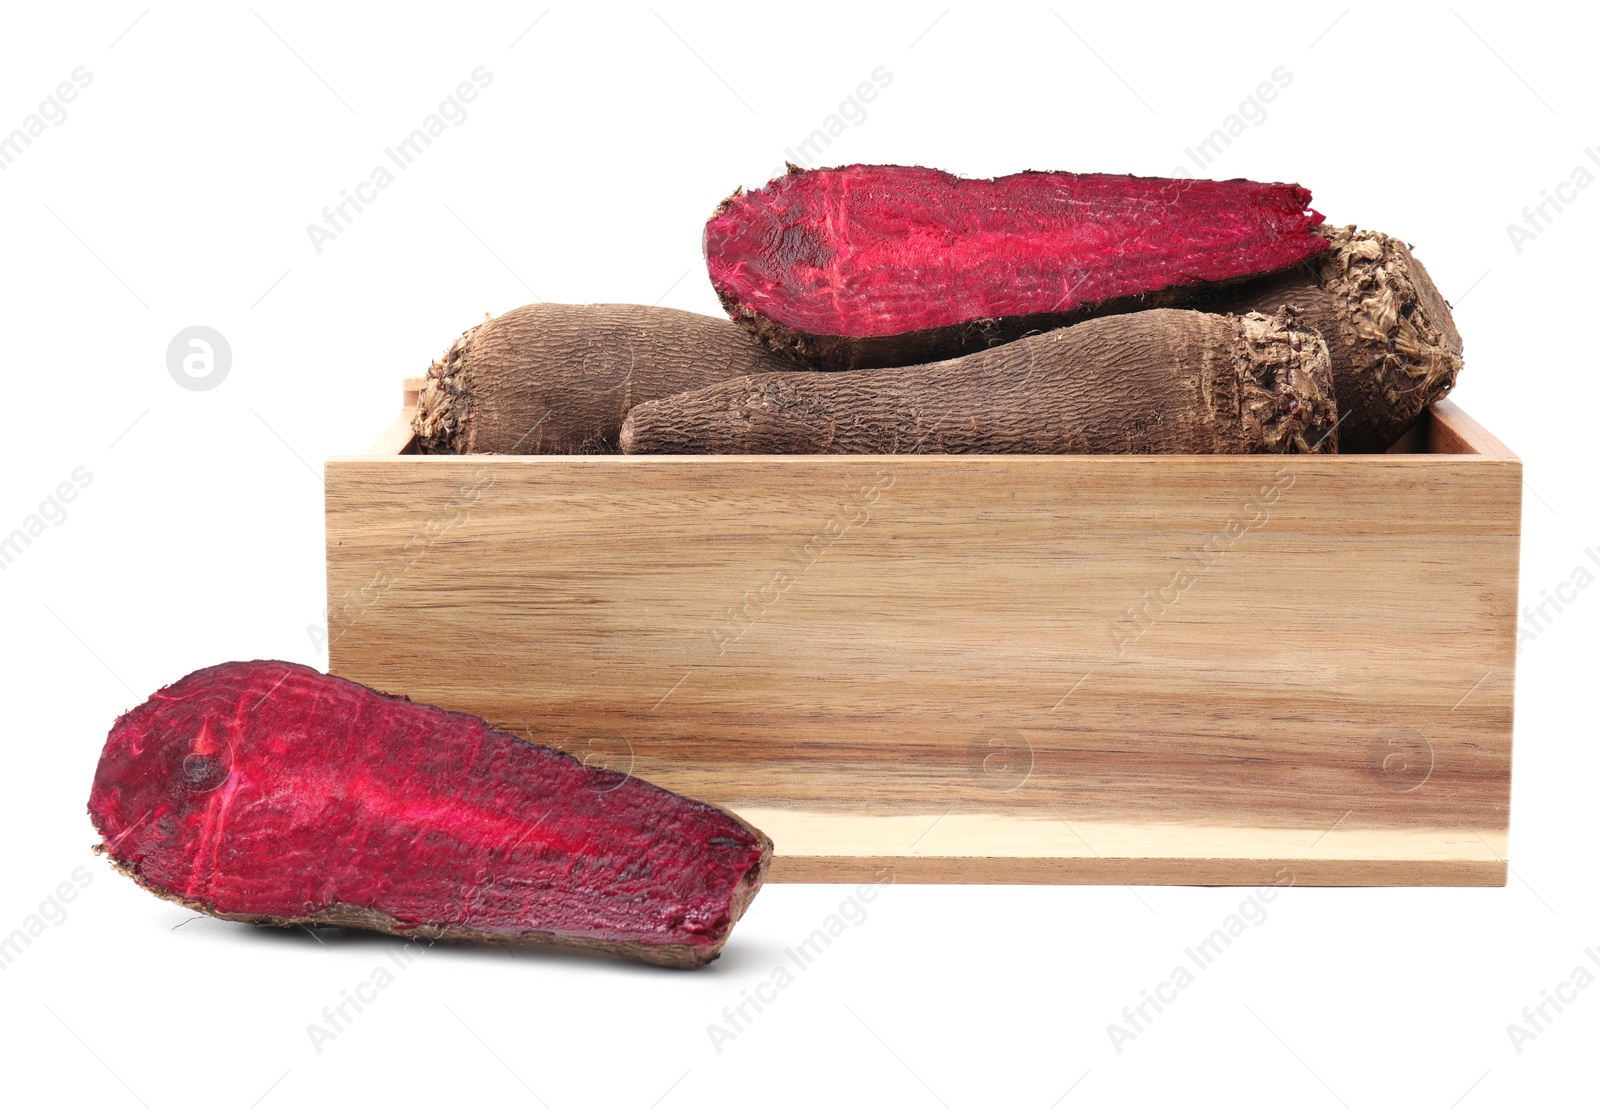 Photo of Whole and cut red beets in wooden crate isolated on white